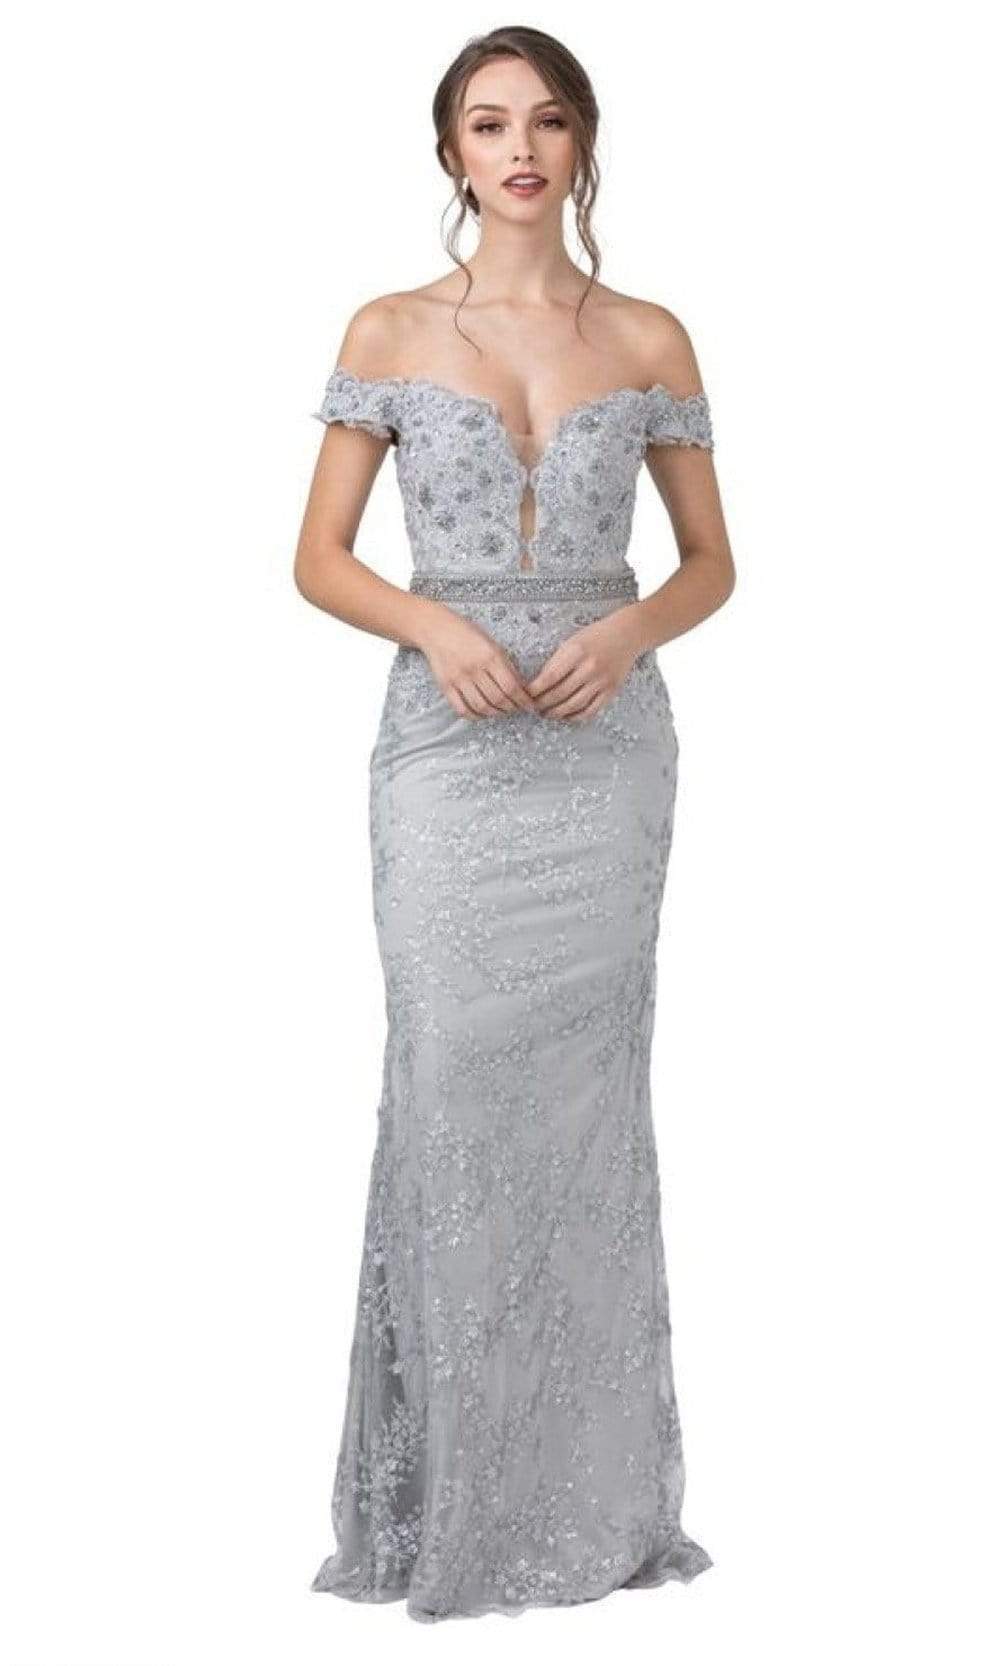 Aspeed Design - Off Shoulder Beaded Lace Dress L2295SC In Silver